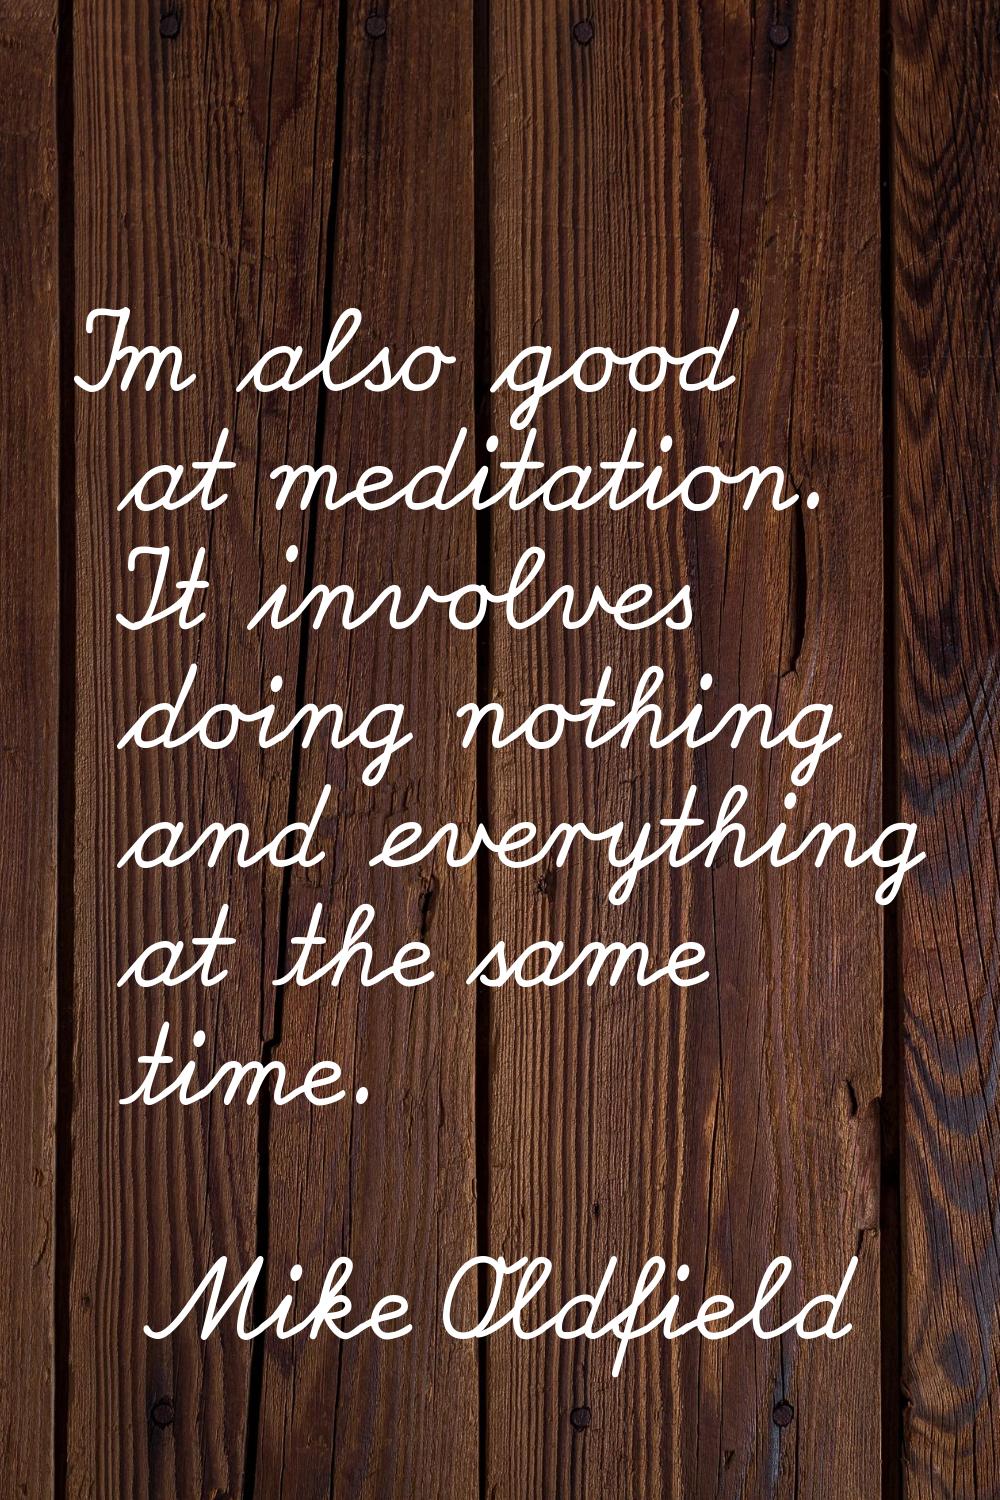 I'm also good at meditation. It involves doing nothing and everything at the same time.